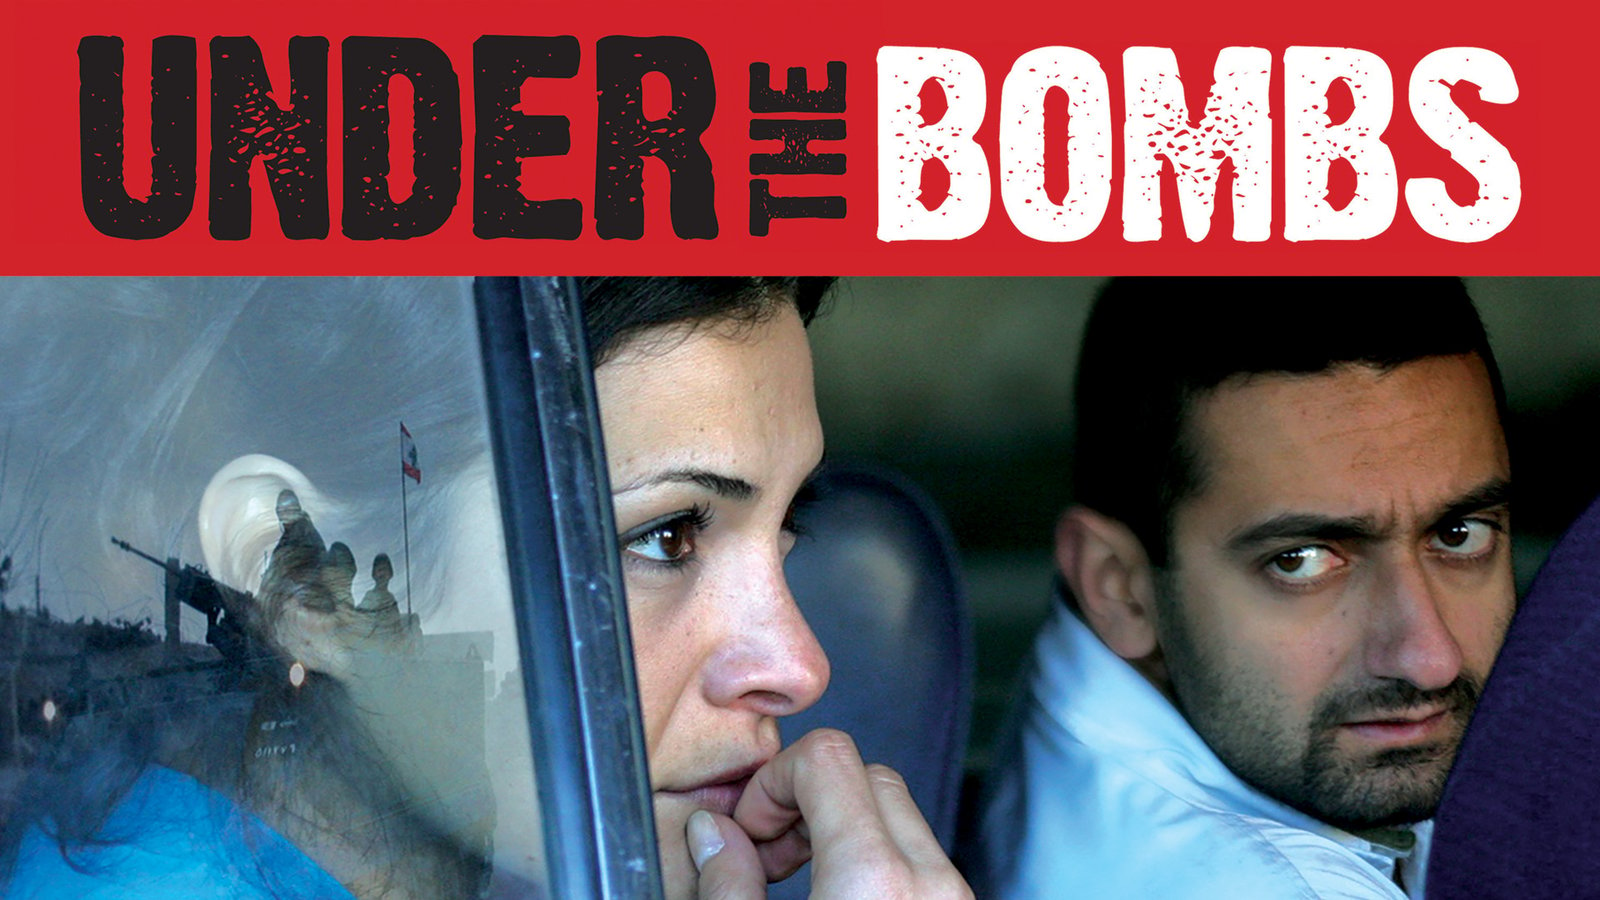 Under the Bombs - Sous les bombes